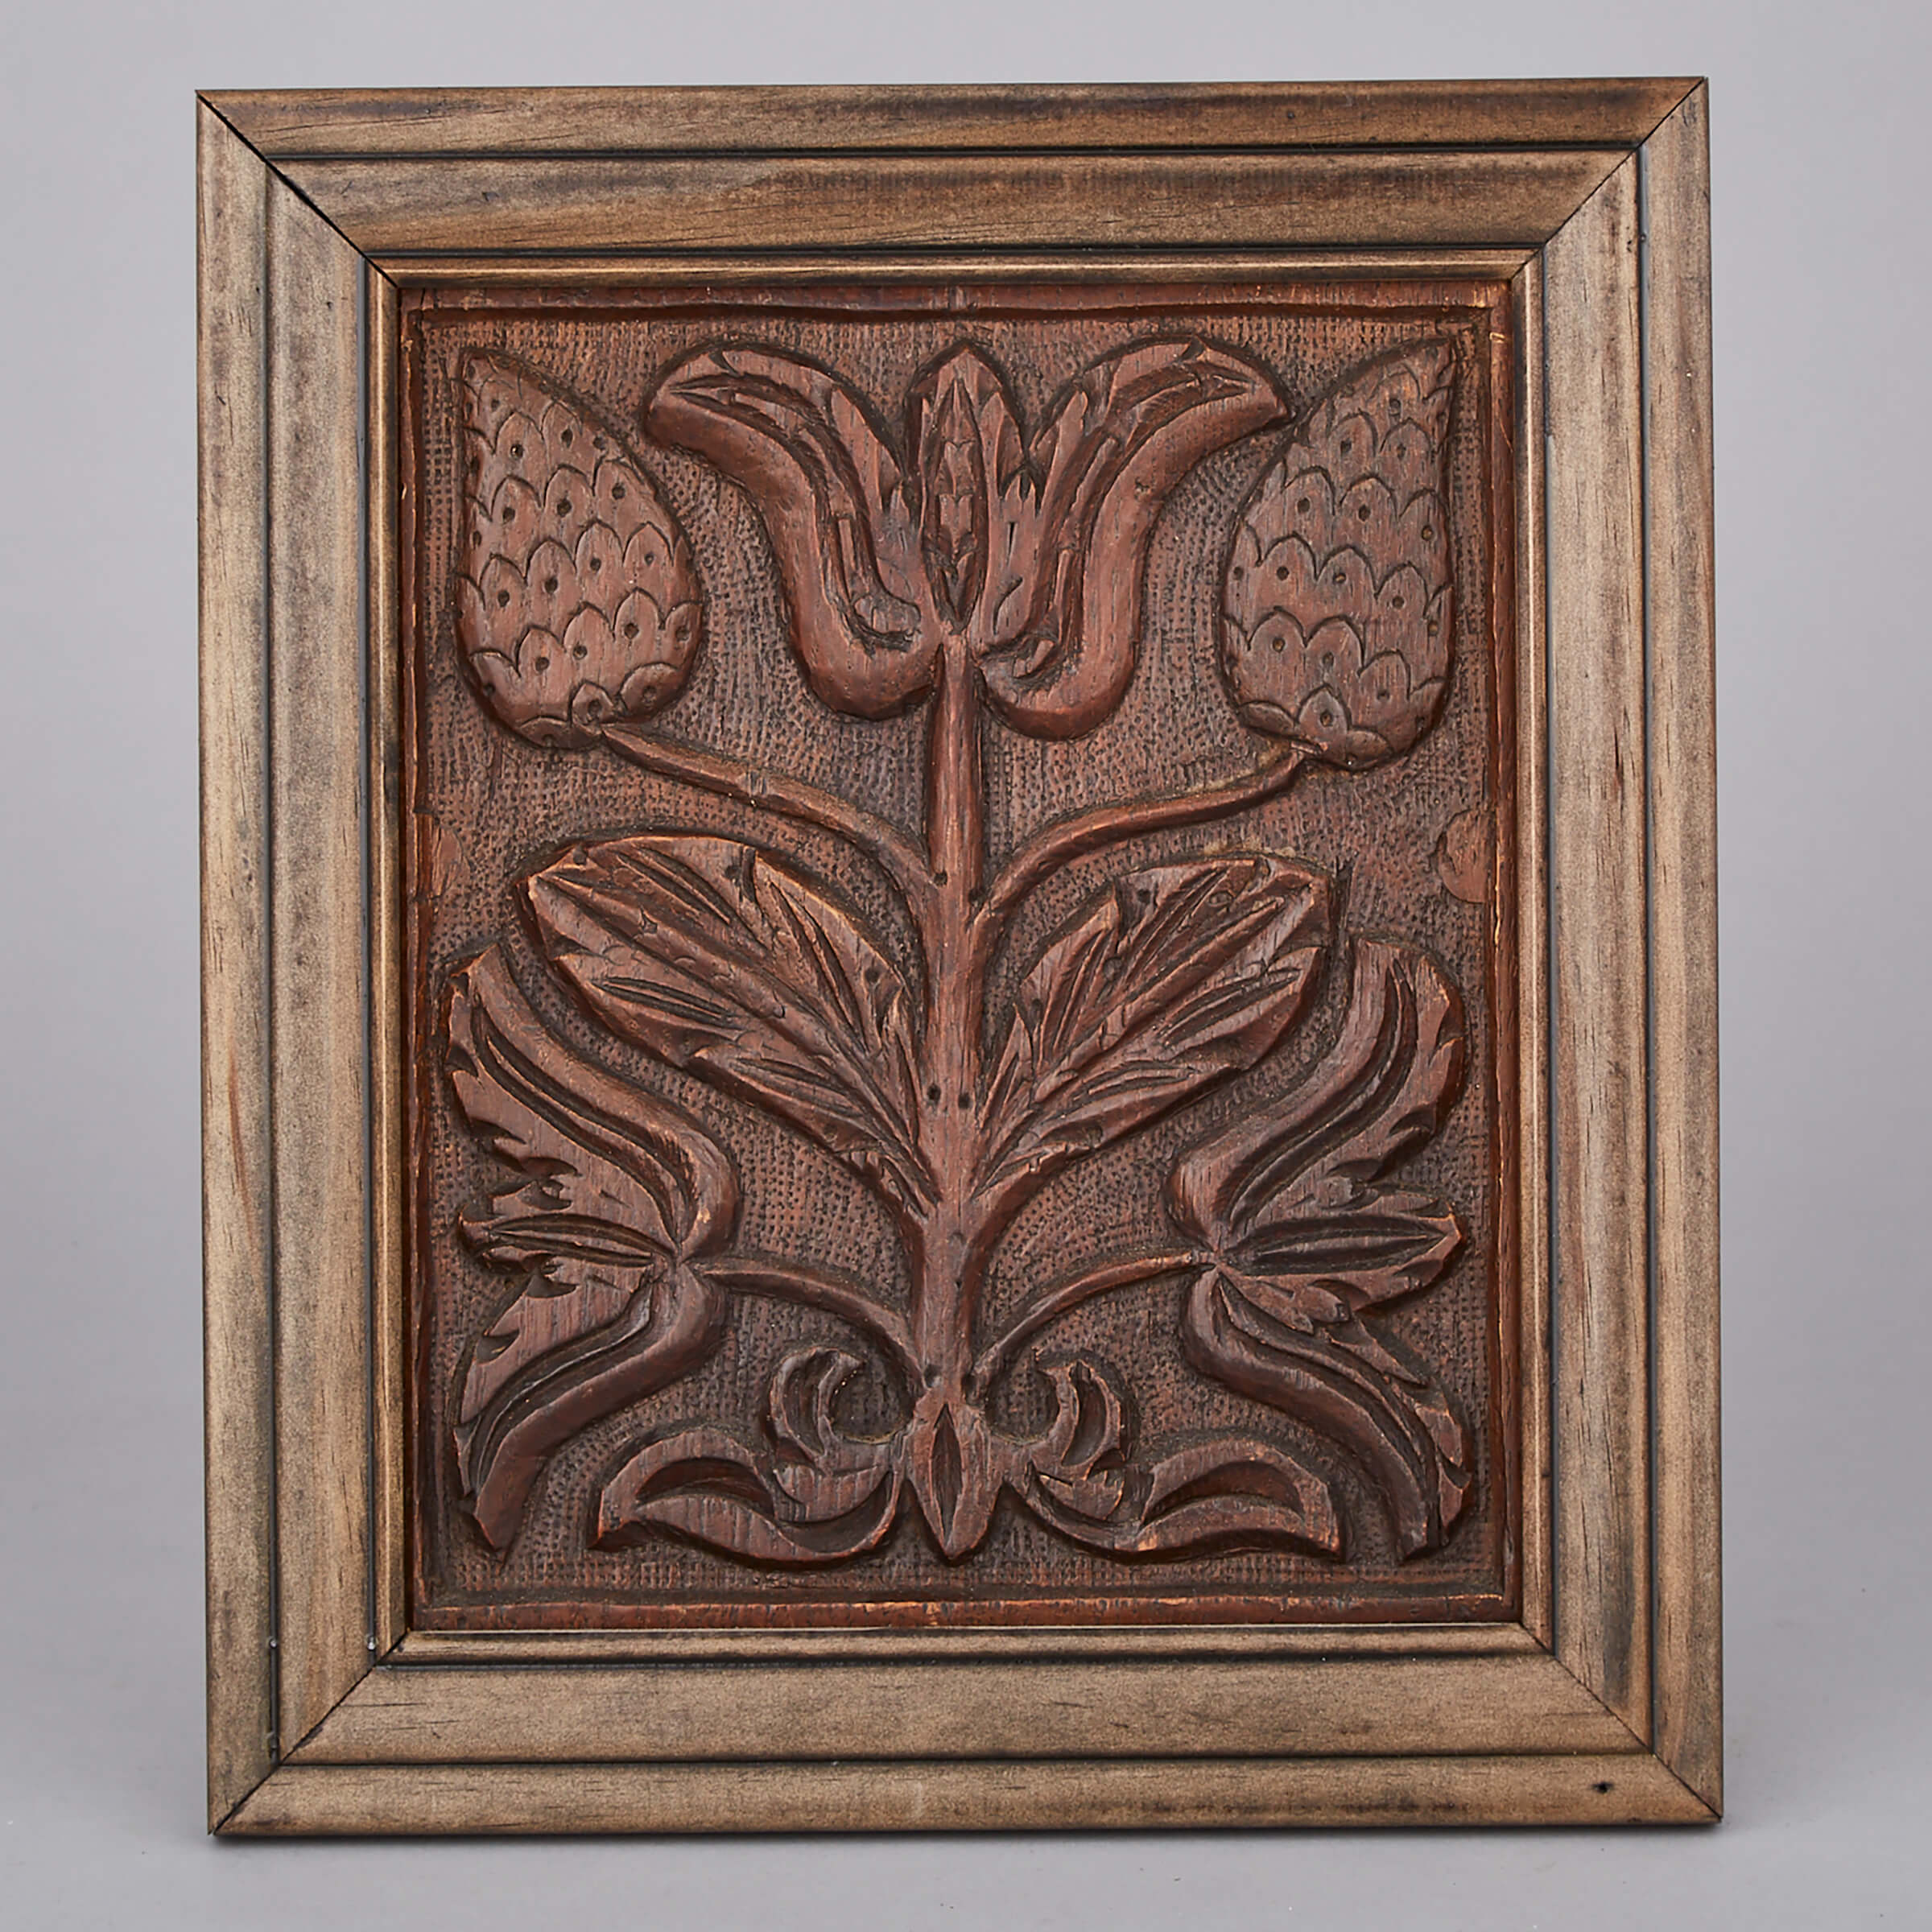 English Relief Carved Oak Tulip Panel, early 17th century